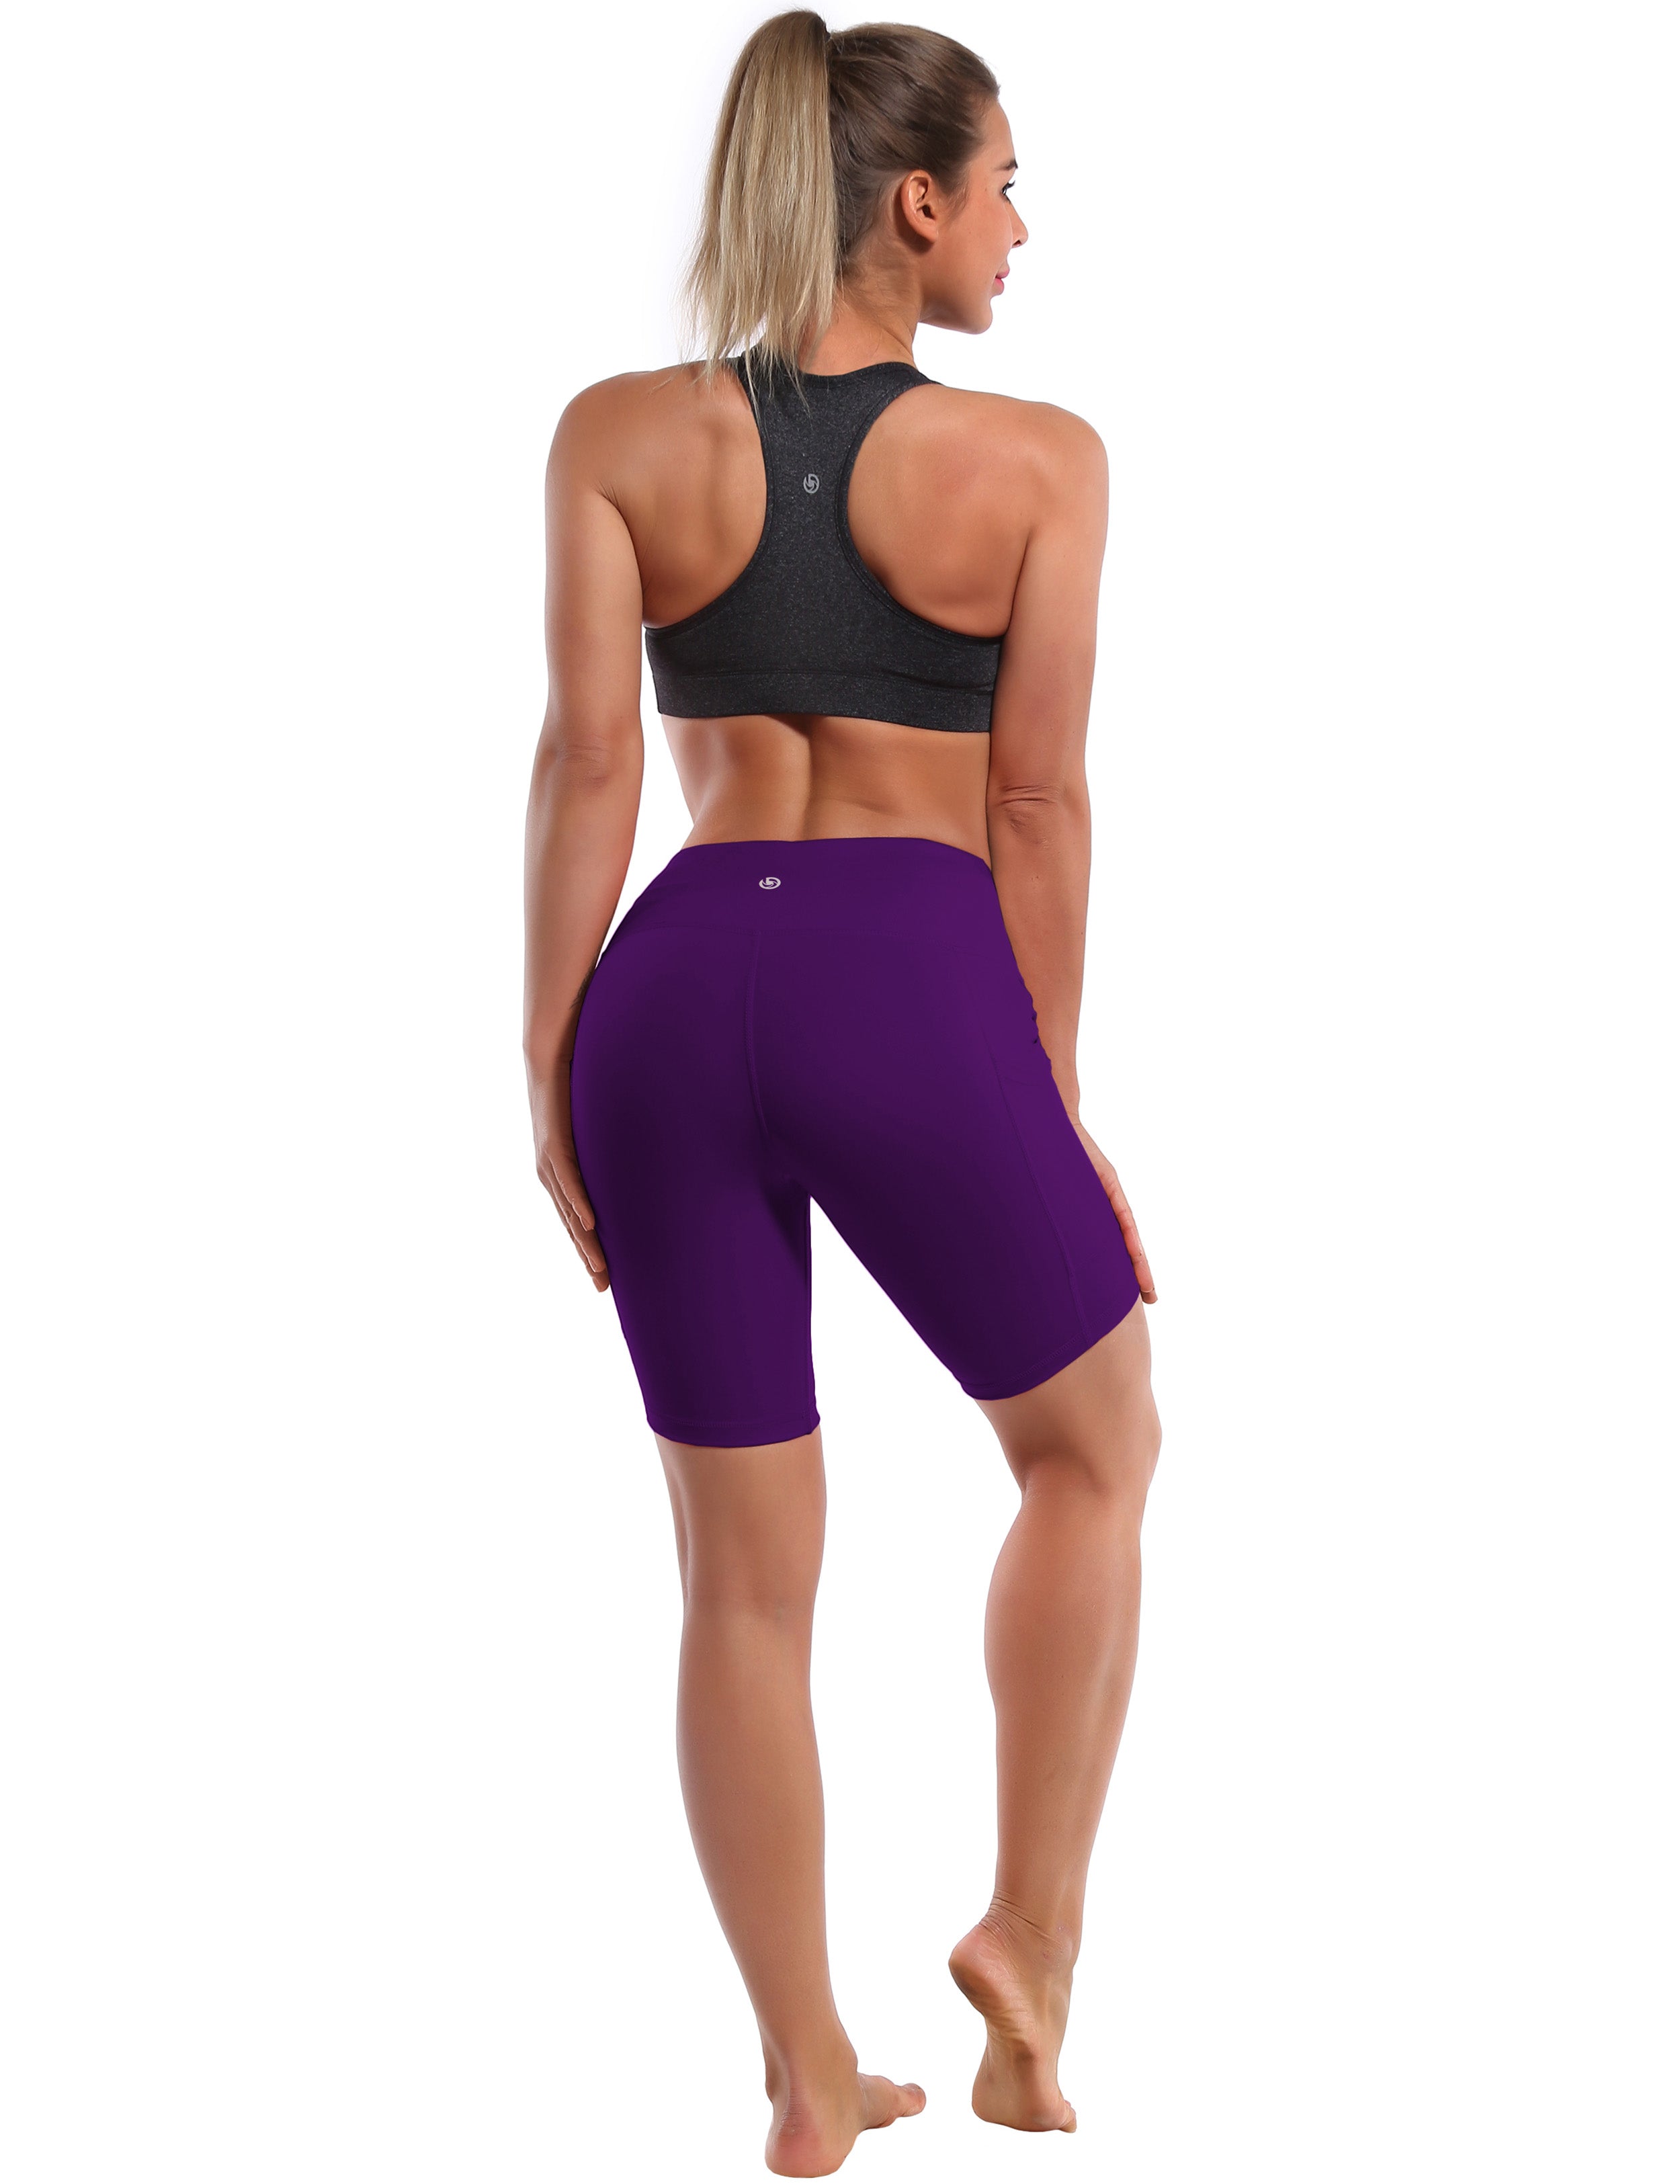 8" Side Pockets Golf Shorts eggplantpurple Sleek, soft, smooth and totally comfortable: our newest style is here. Softest-ever fabric High elasticity High density 4-way stretch Fabric doesn't attract lint easily No see-through Moisture-wicking Machine wash 75% Nylon, 25% Spandex